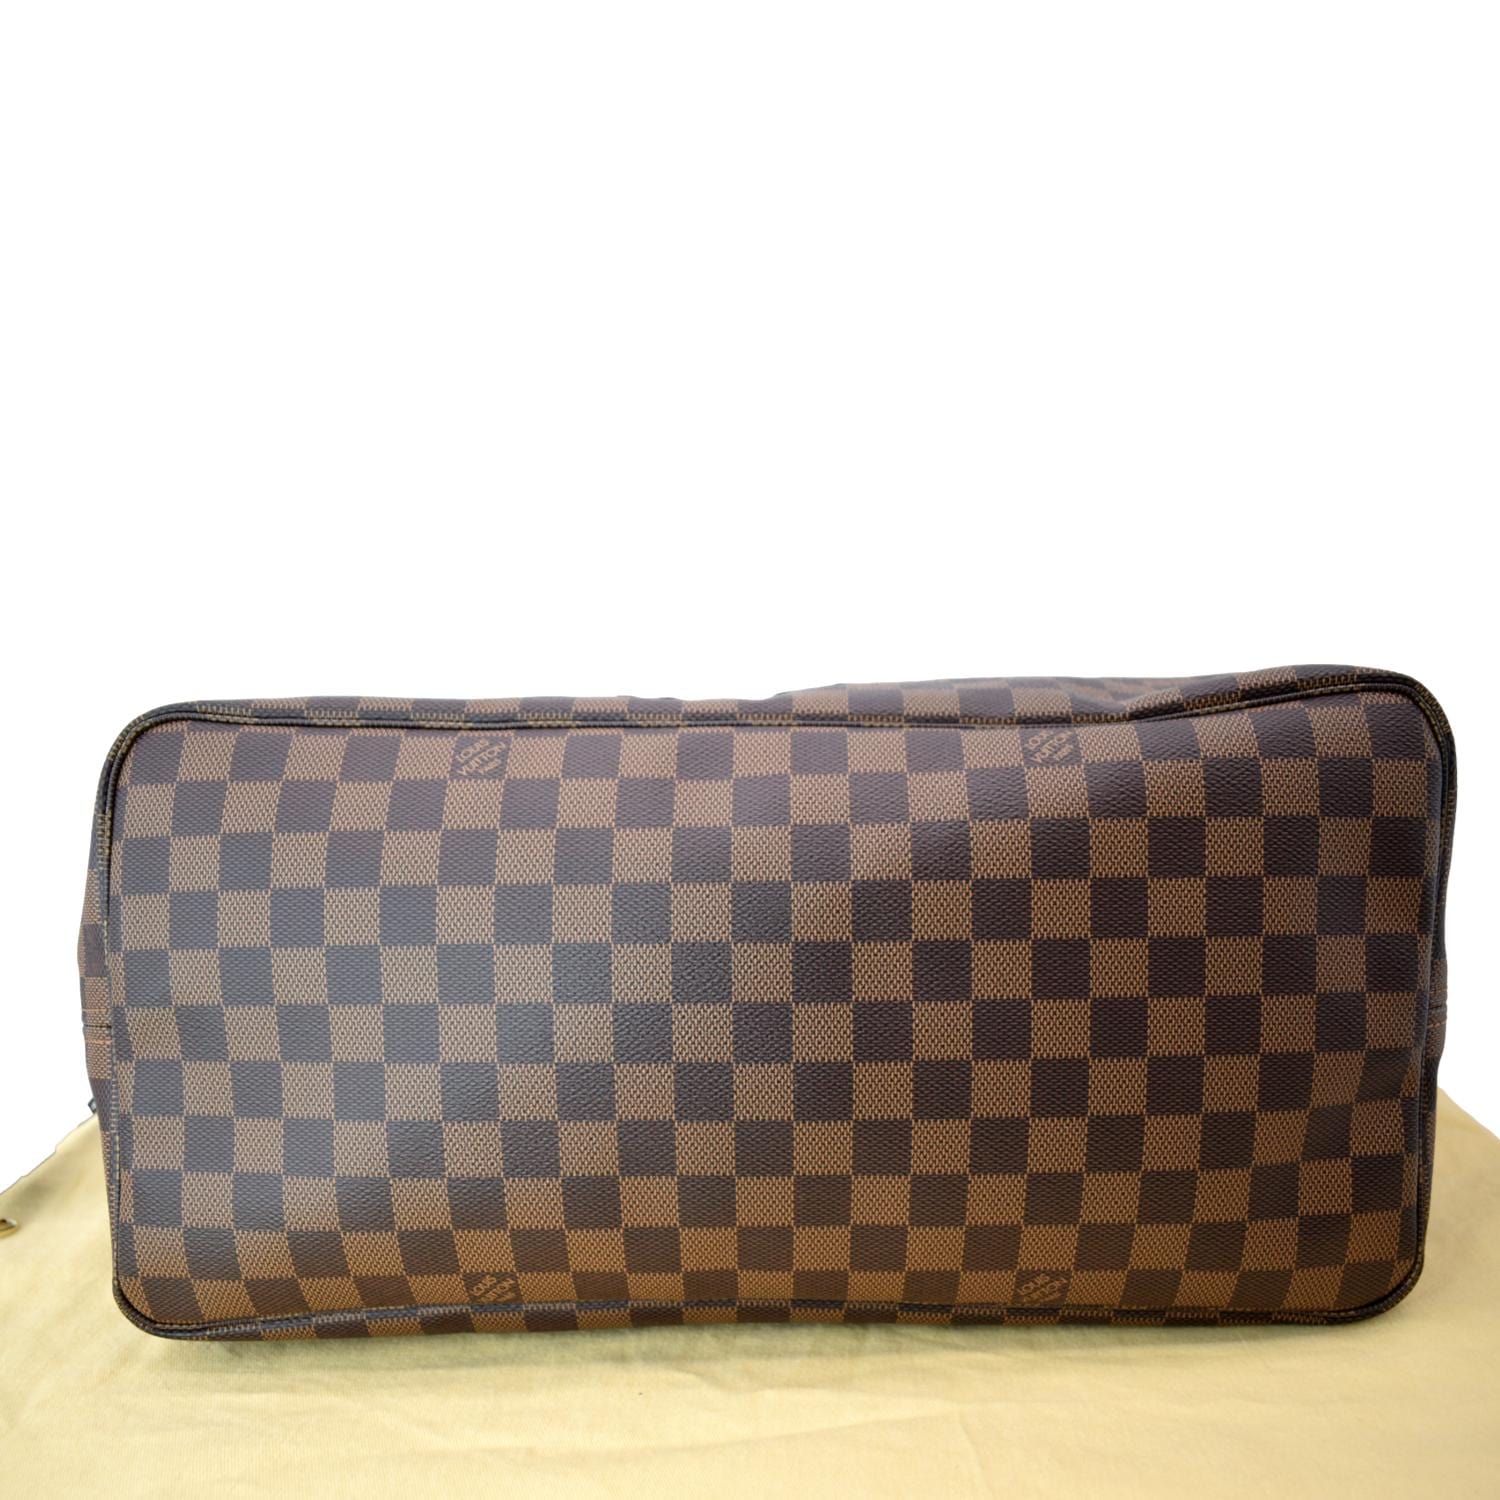 BAG NEW ARRIVAL - LV NEVERFULL BROWN AND RED GM 40CM M41180 – Sneakbag